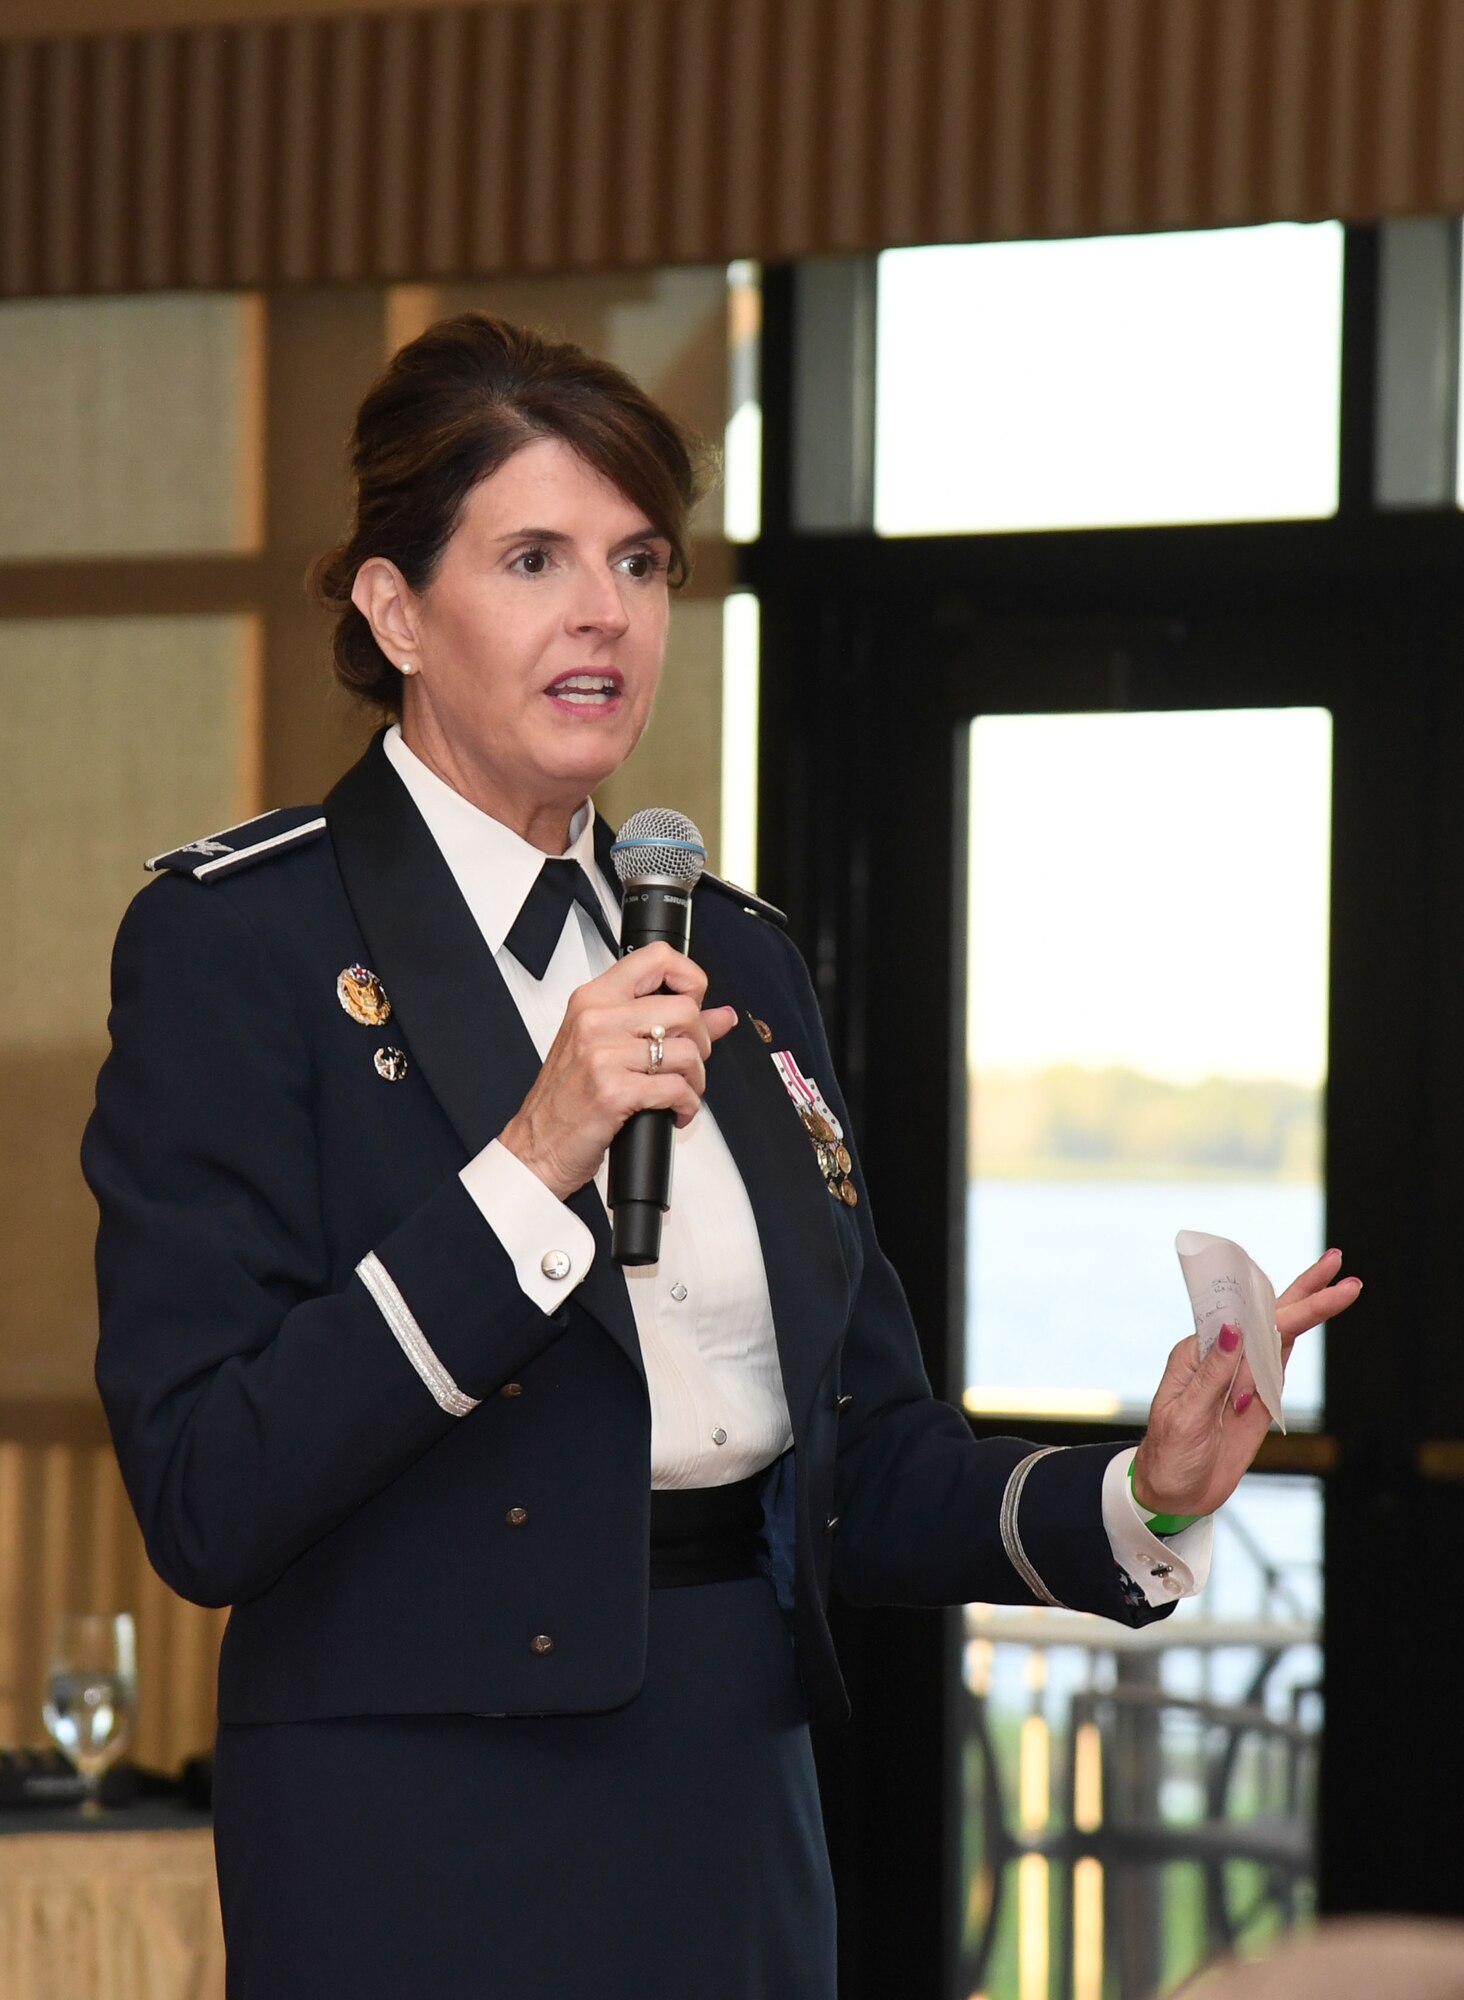 U.S. Air Force Col. Laura King, 81st Training Group commander, delivers remarks during the 81st Training Group Airman's Ball inside the Bay Breeze Event Center at Keesler Air Force Base, Mississippi, Sept. 30, 2022. The event was geared toward Airmen in training on how to participate and act during a formal military ball so they can feel confident in their abilities when arriving at their follow-on locations. The Airmen served in key positions throughout the ball such as emcees, color guard, POW/MIA table ceremony, national anthem singer and the invocation. (U.S. Air Force photo by Kemberly Groue)